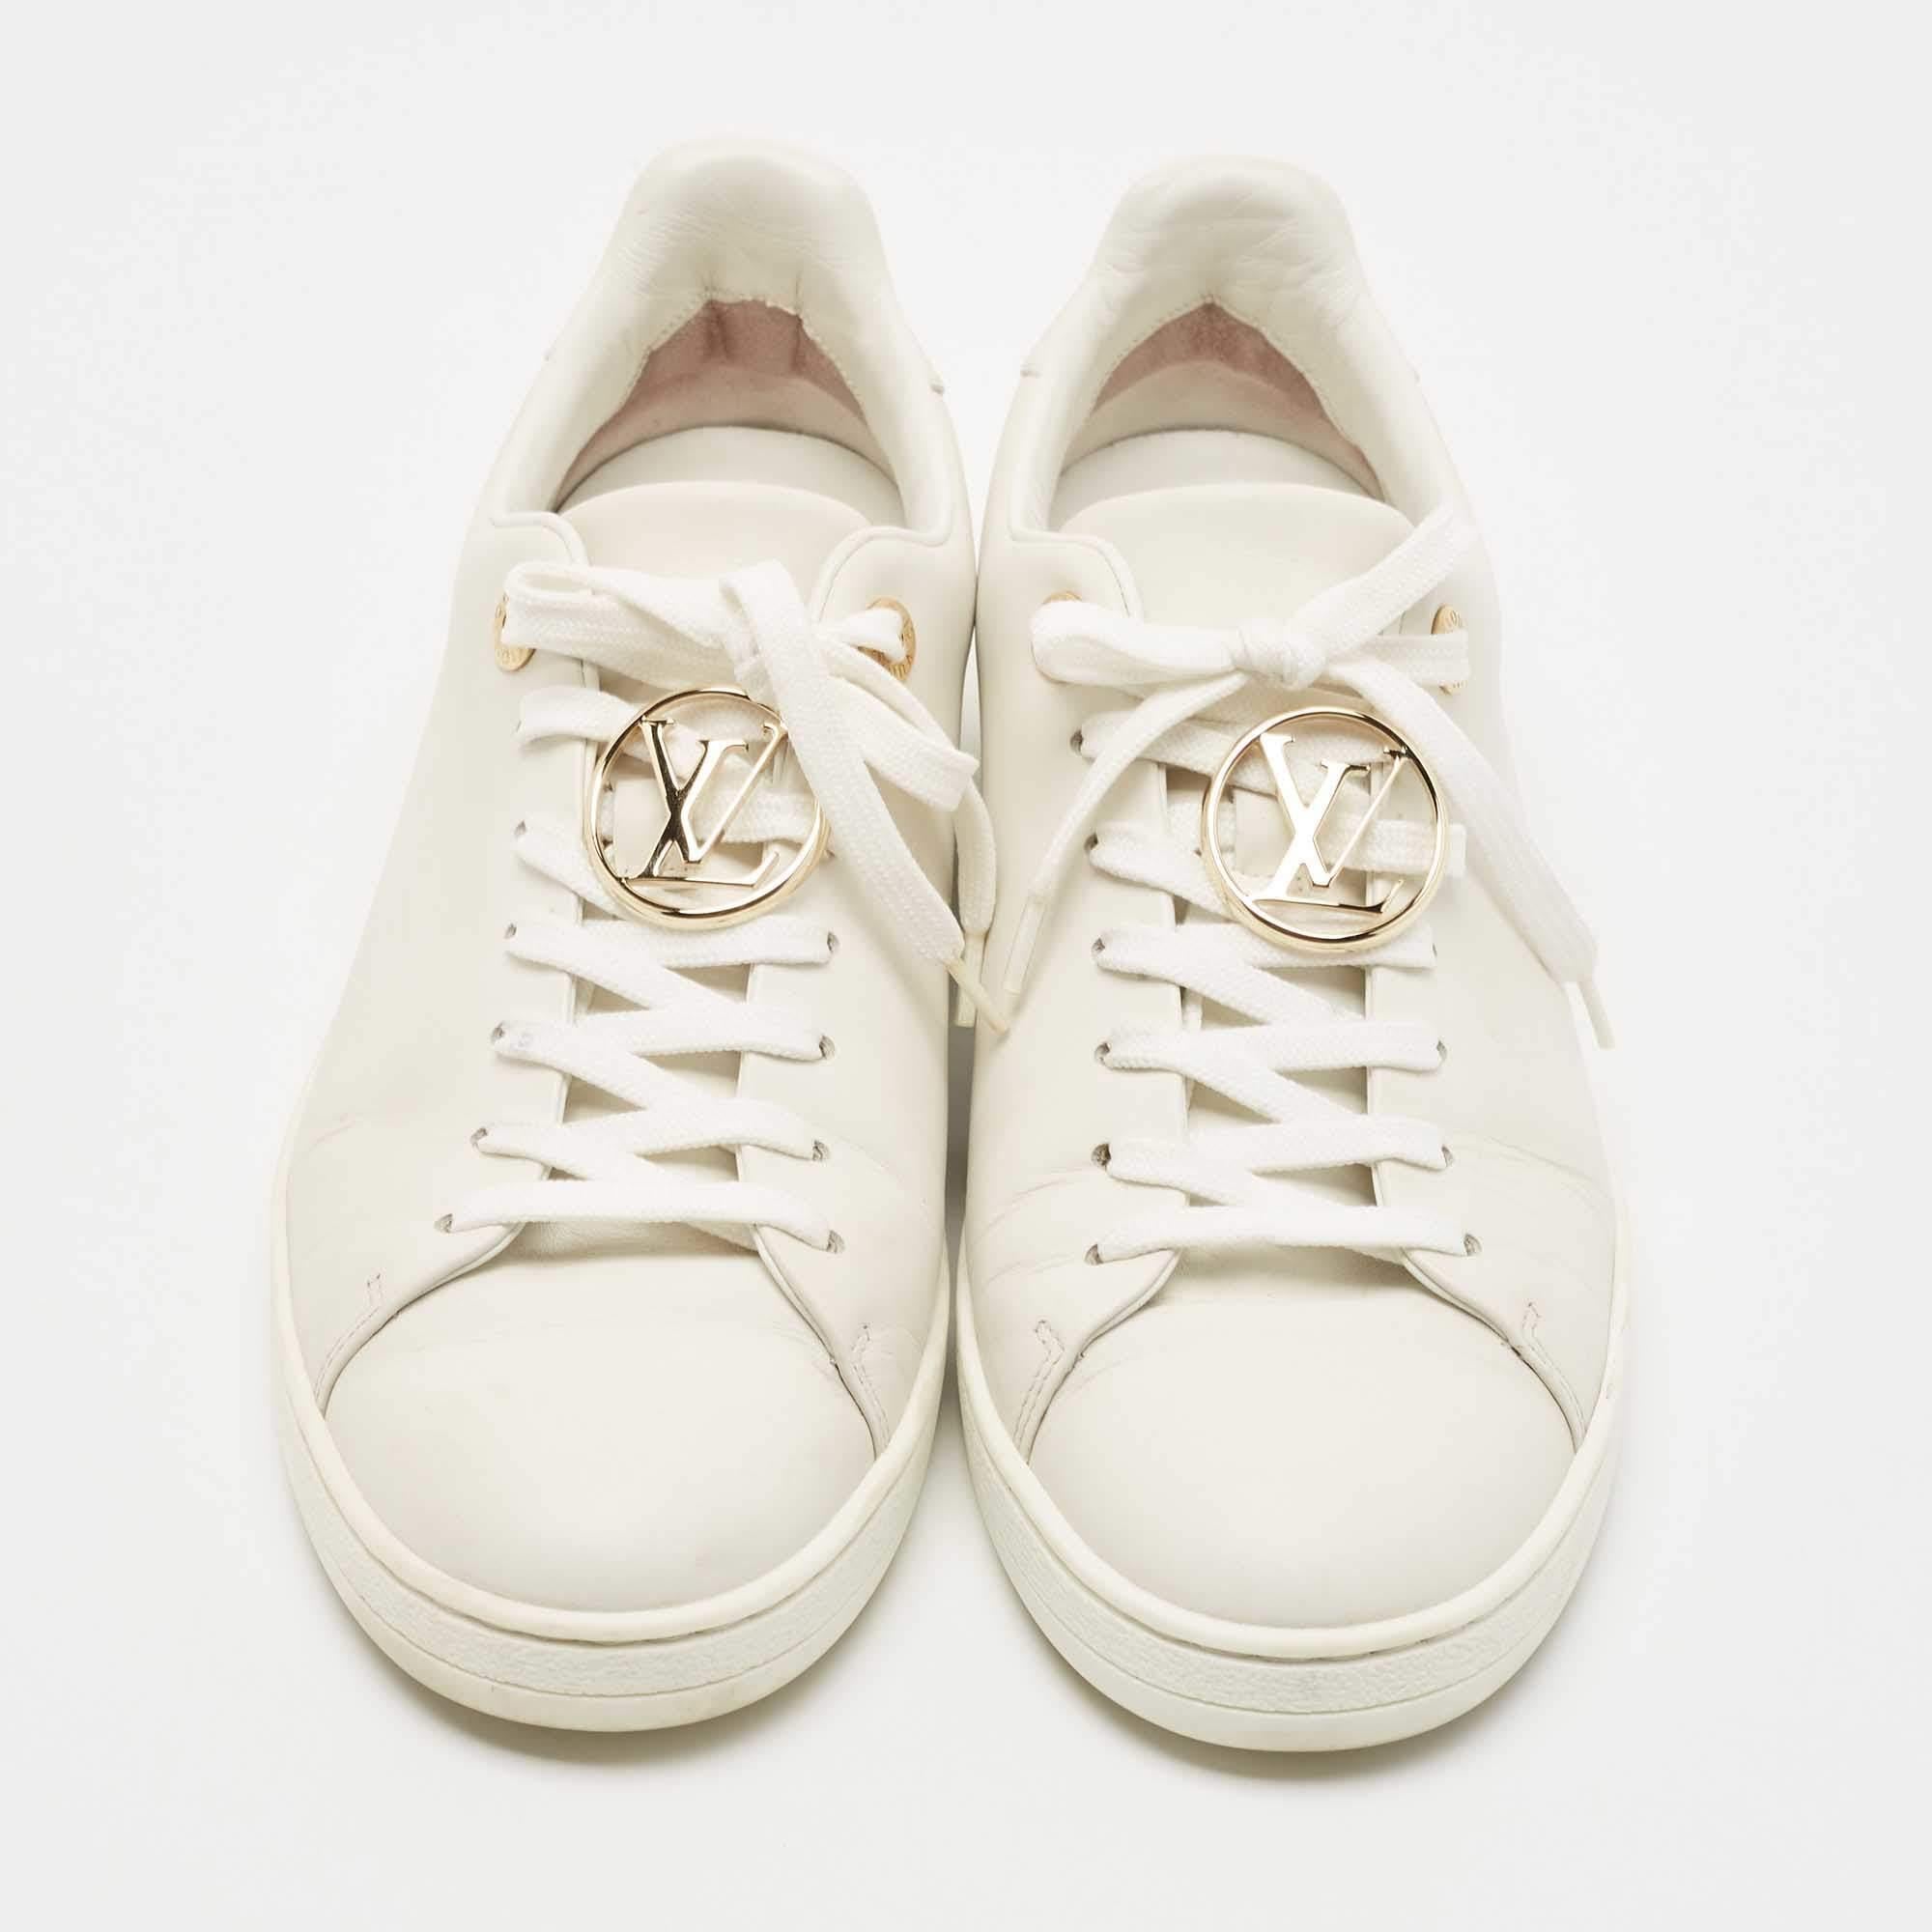 Add a statement appeal to your outfit with these sneakers. Made from premium materials, they feature lace-up vamps and relaxing footbeds. The rubber sole of this pair aims to provide you with everyday ease.

Includes: Original Dustbag, Original Box,